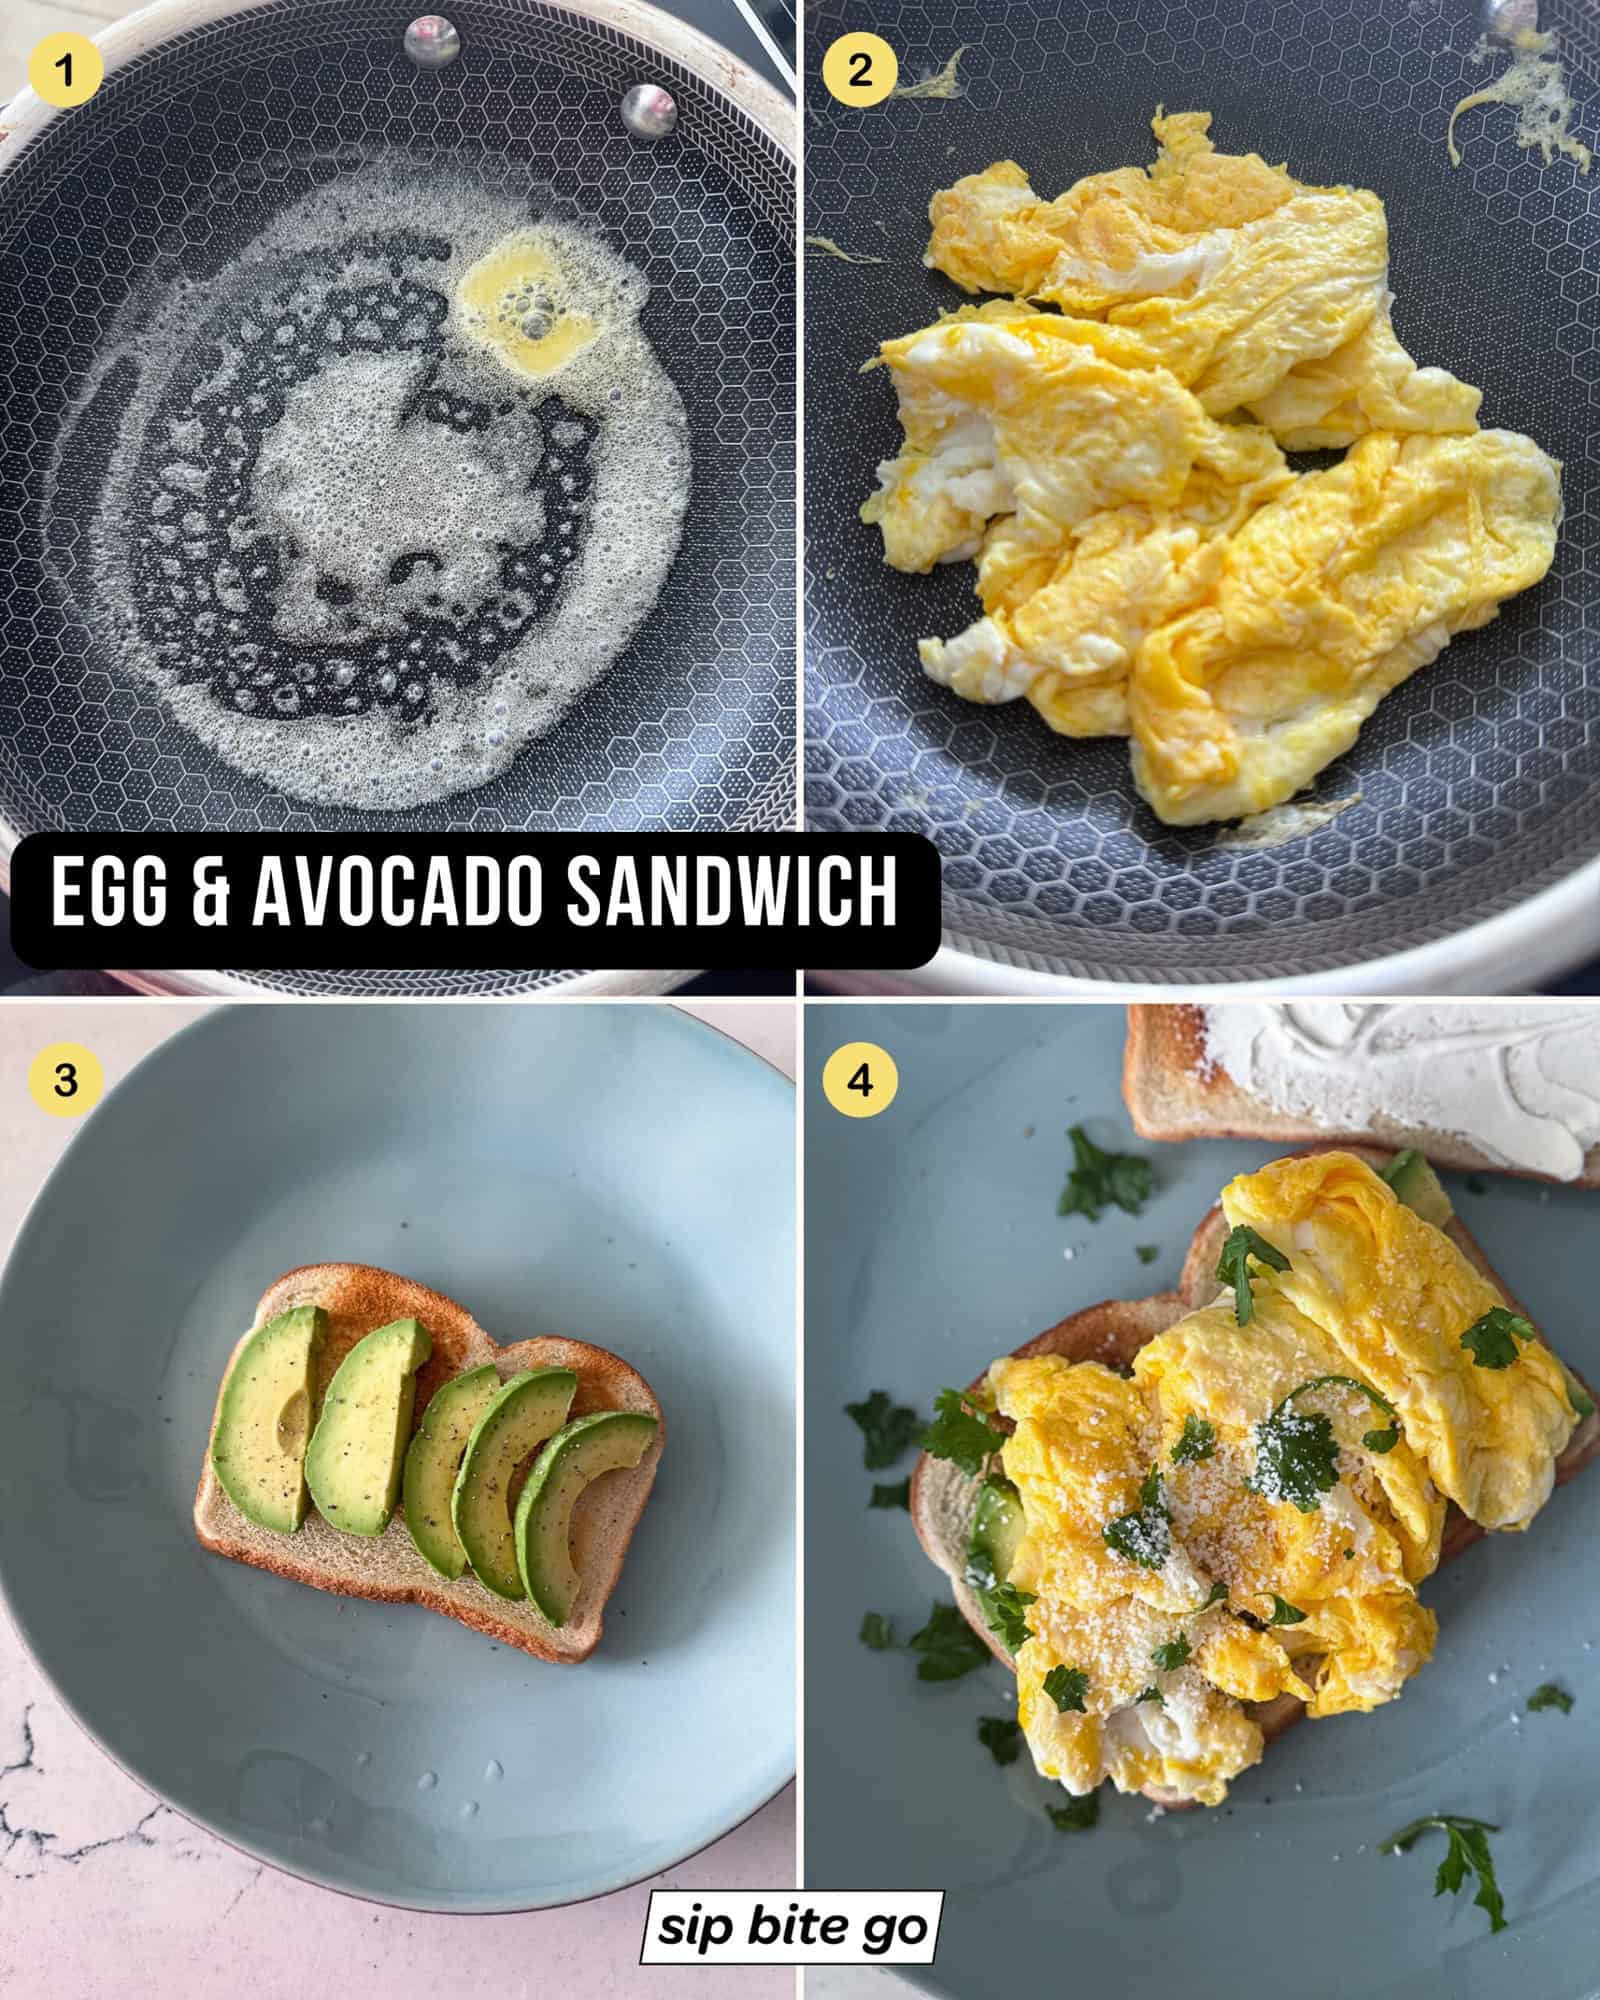 Recipe Steps for making Egg and Avocado Sandwich